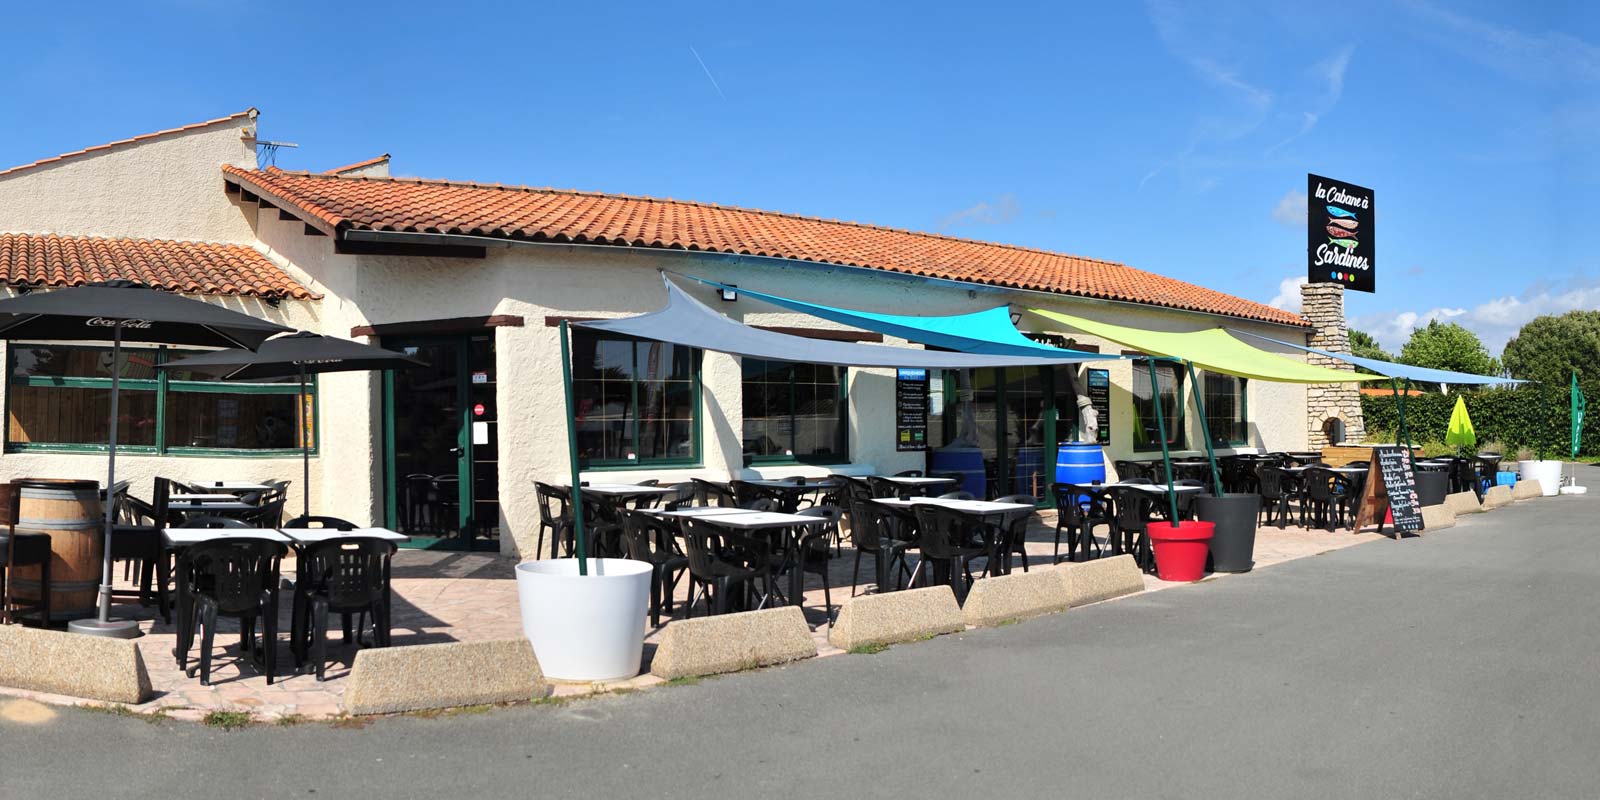 The terrace of the sardines restaurant at the Bois Tordu campsite in Vendée